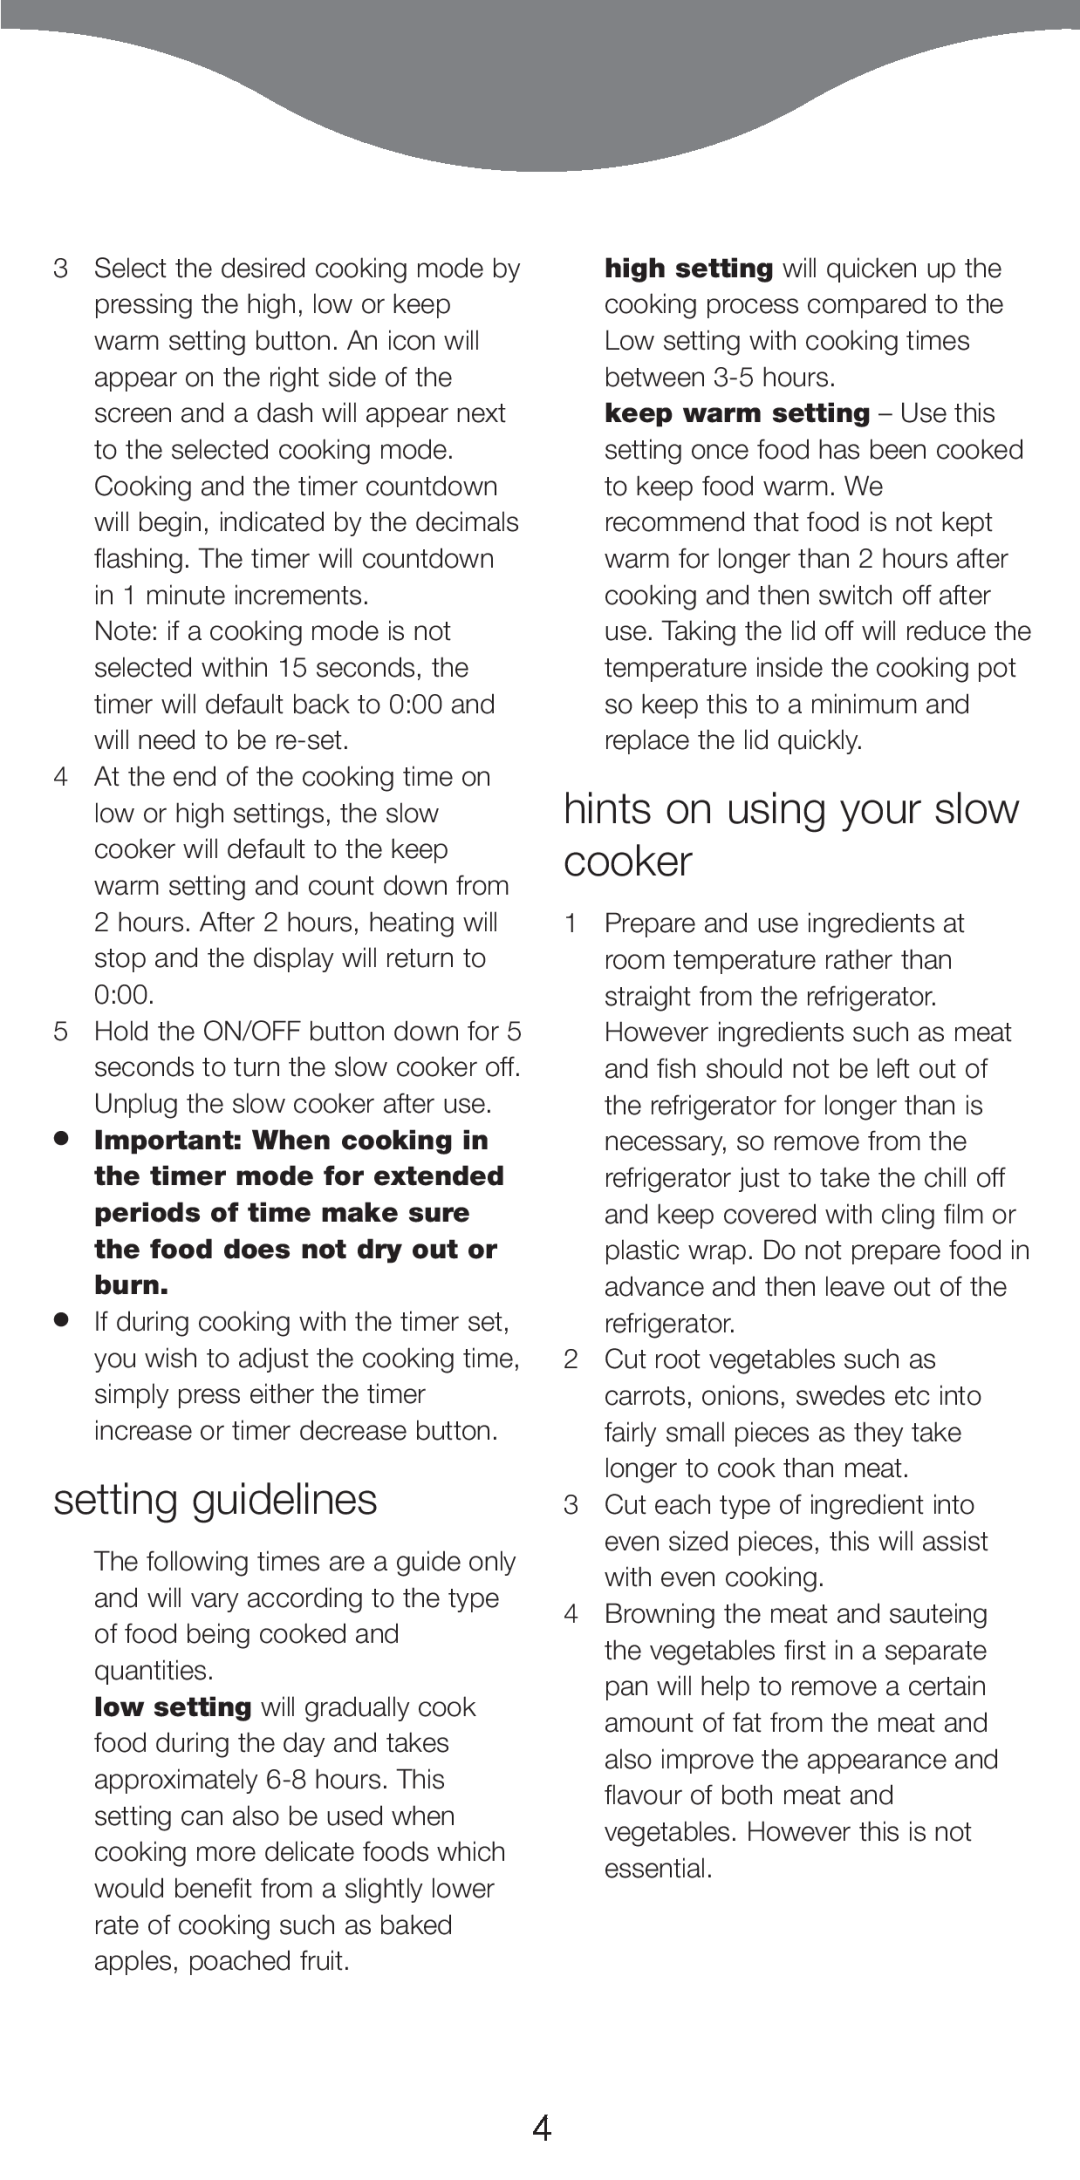 Kenwood CP706, CP707 manual setting guidelines, hints on using your slow cooker 